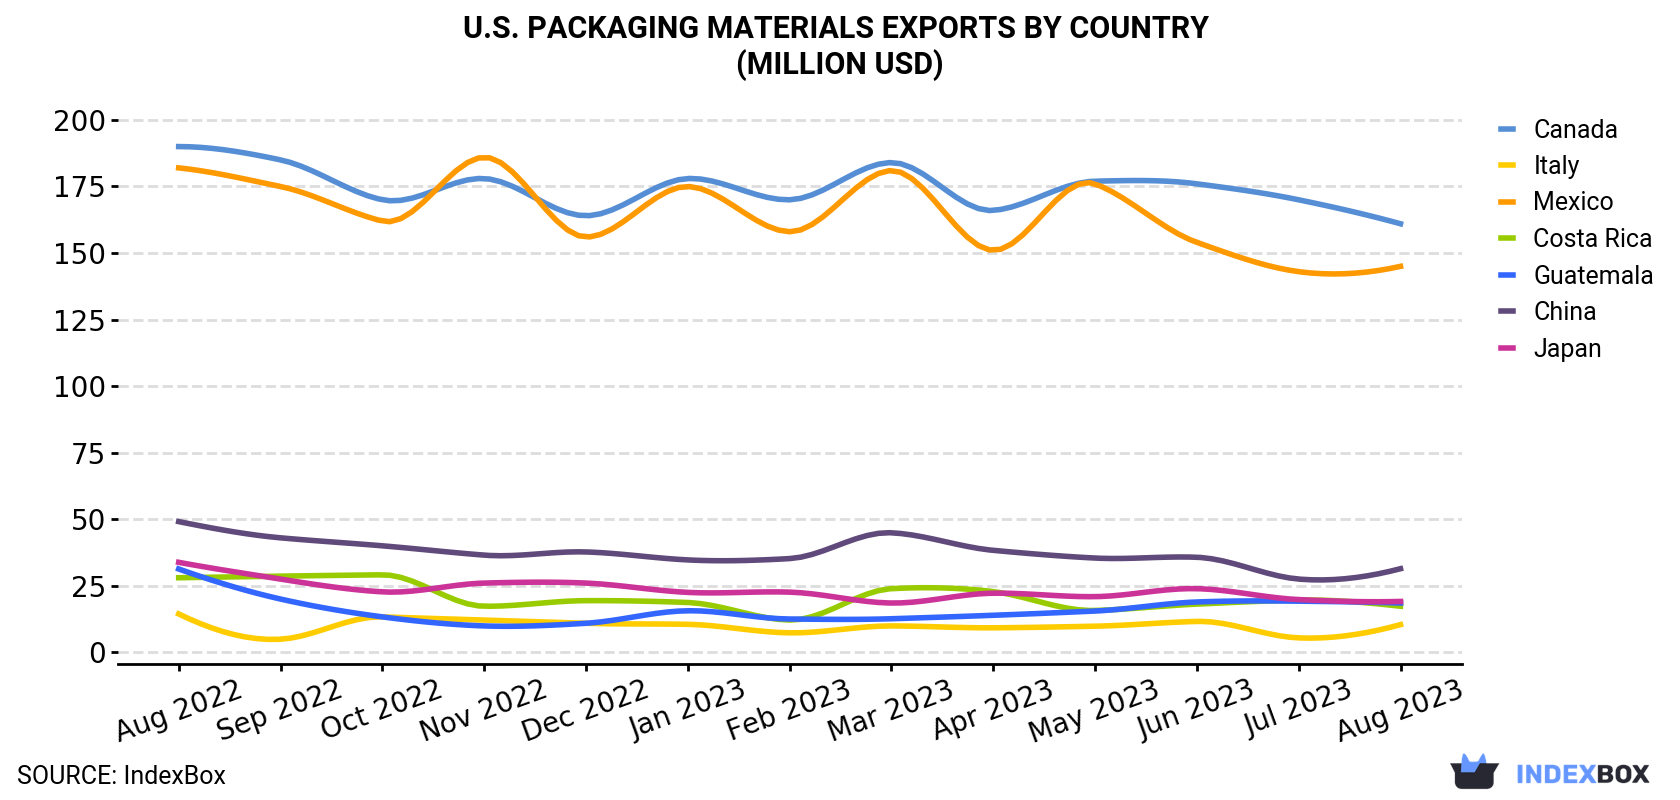 U.S. Packaging Materials Exports By Country (Million USD)